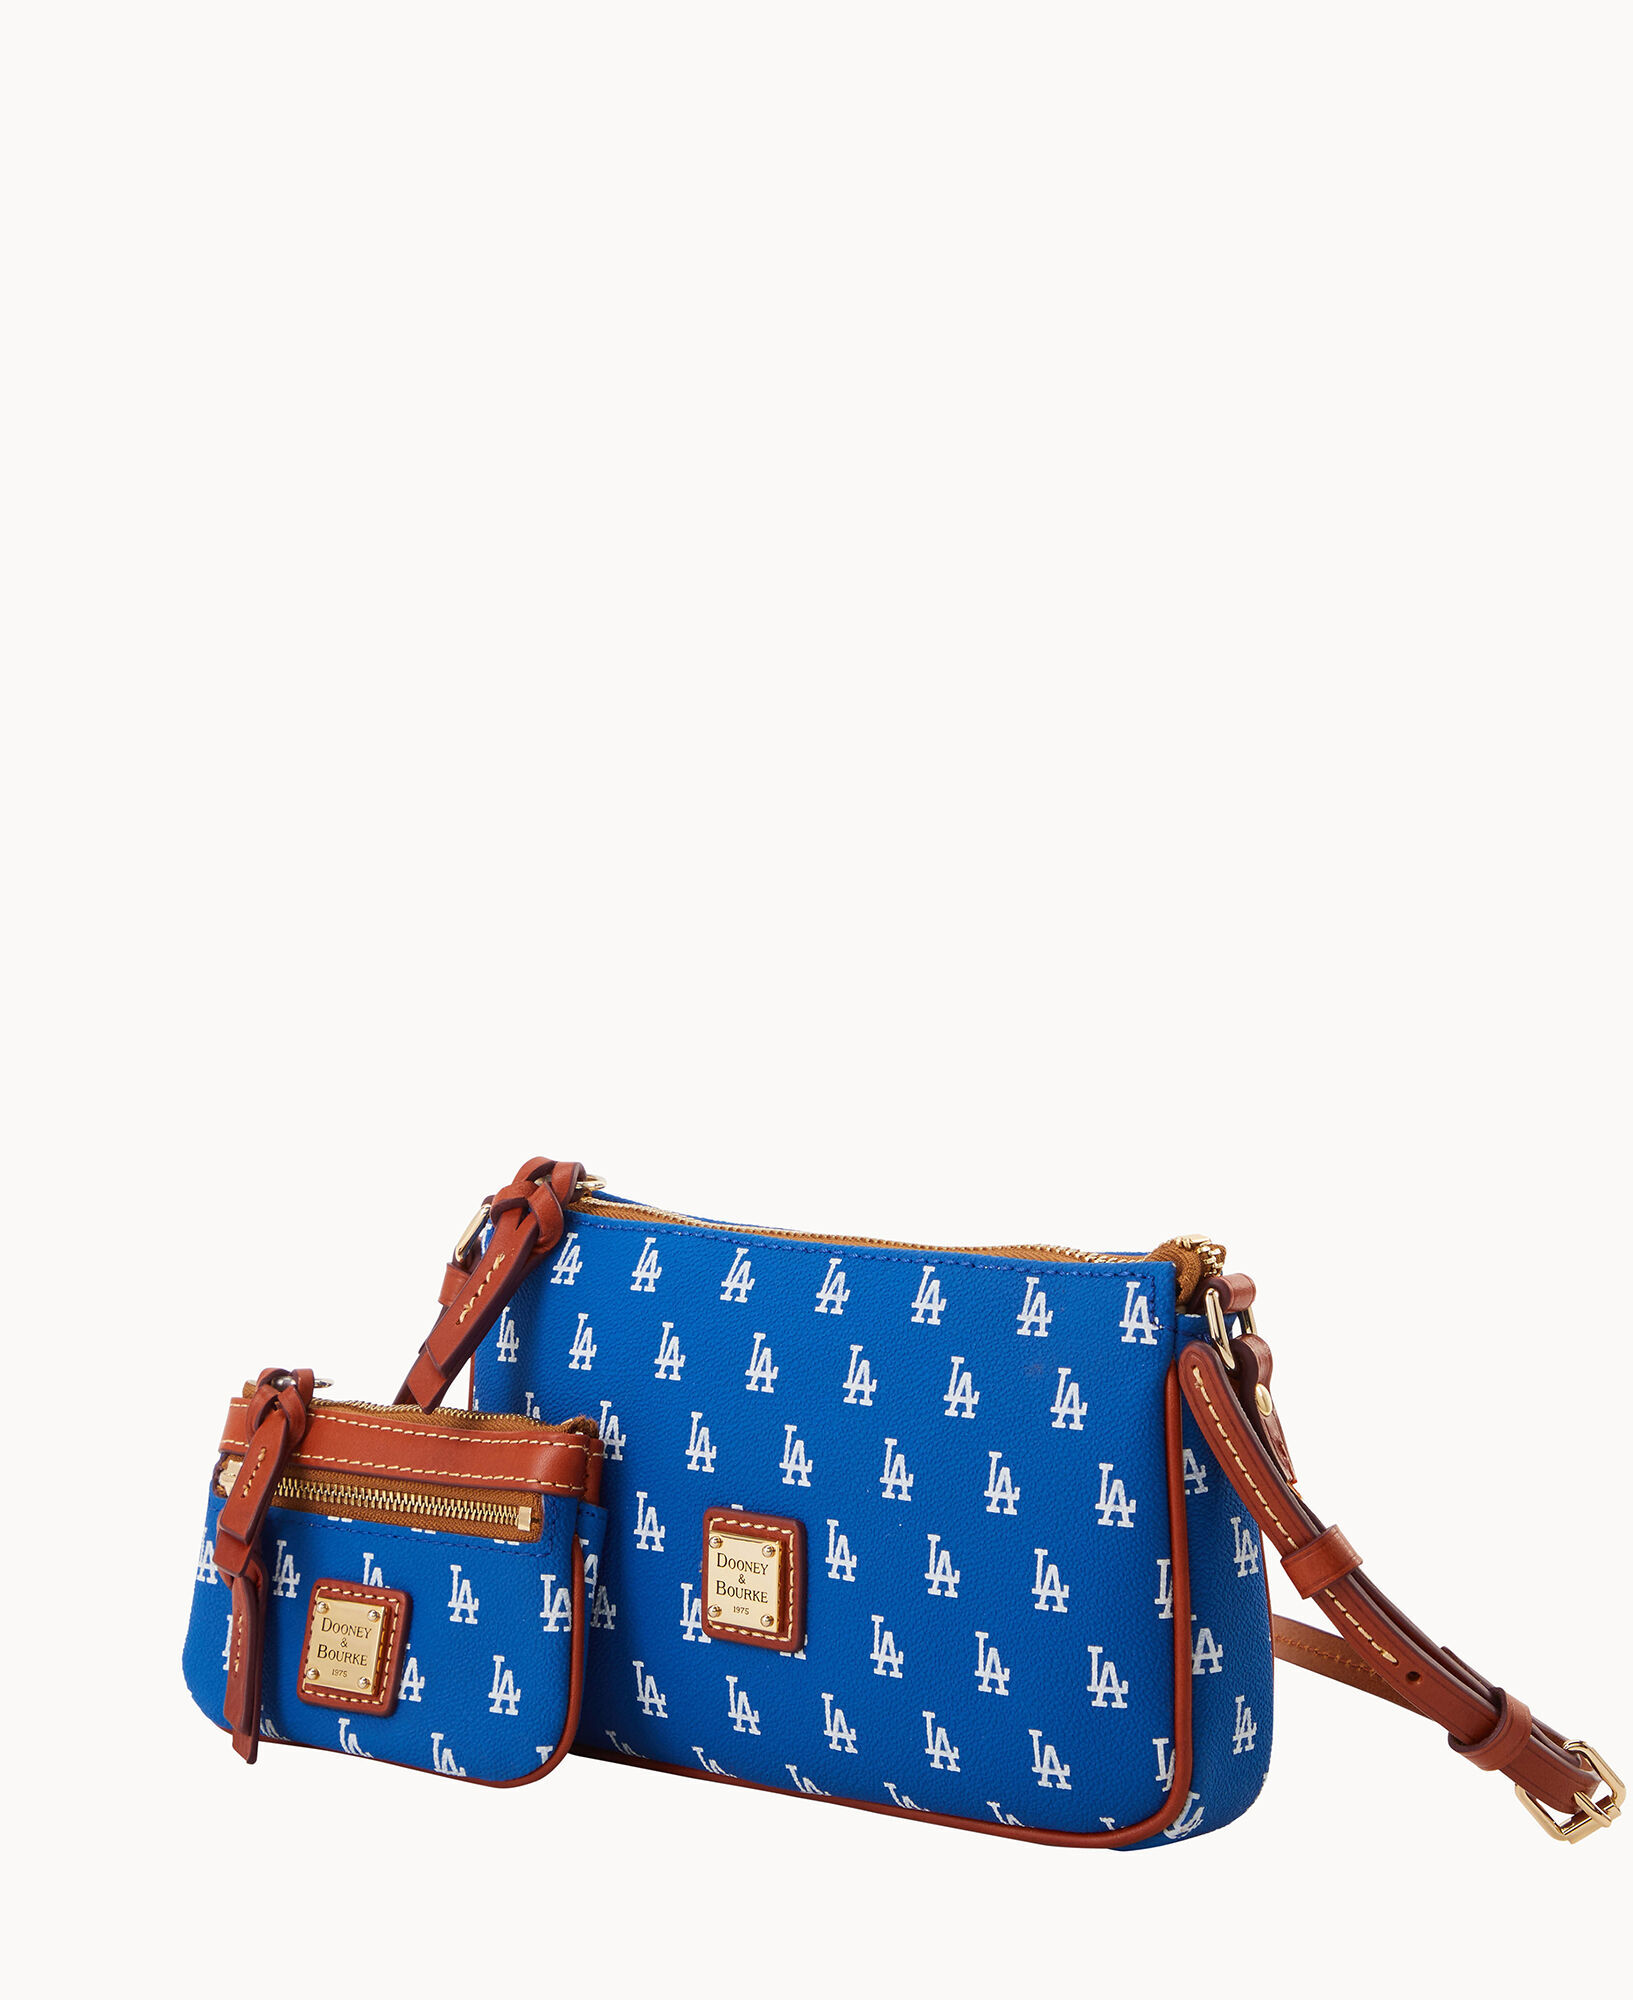 Dooney and Bourke Lexi Crossbody bag review and WIMB 